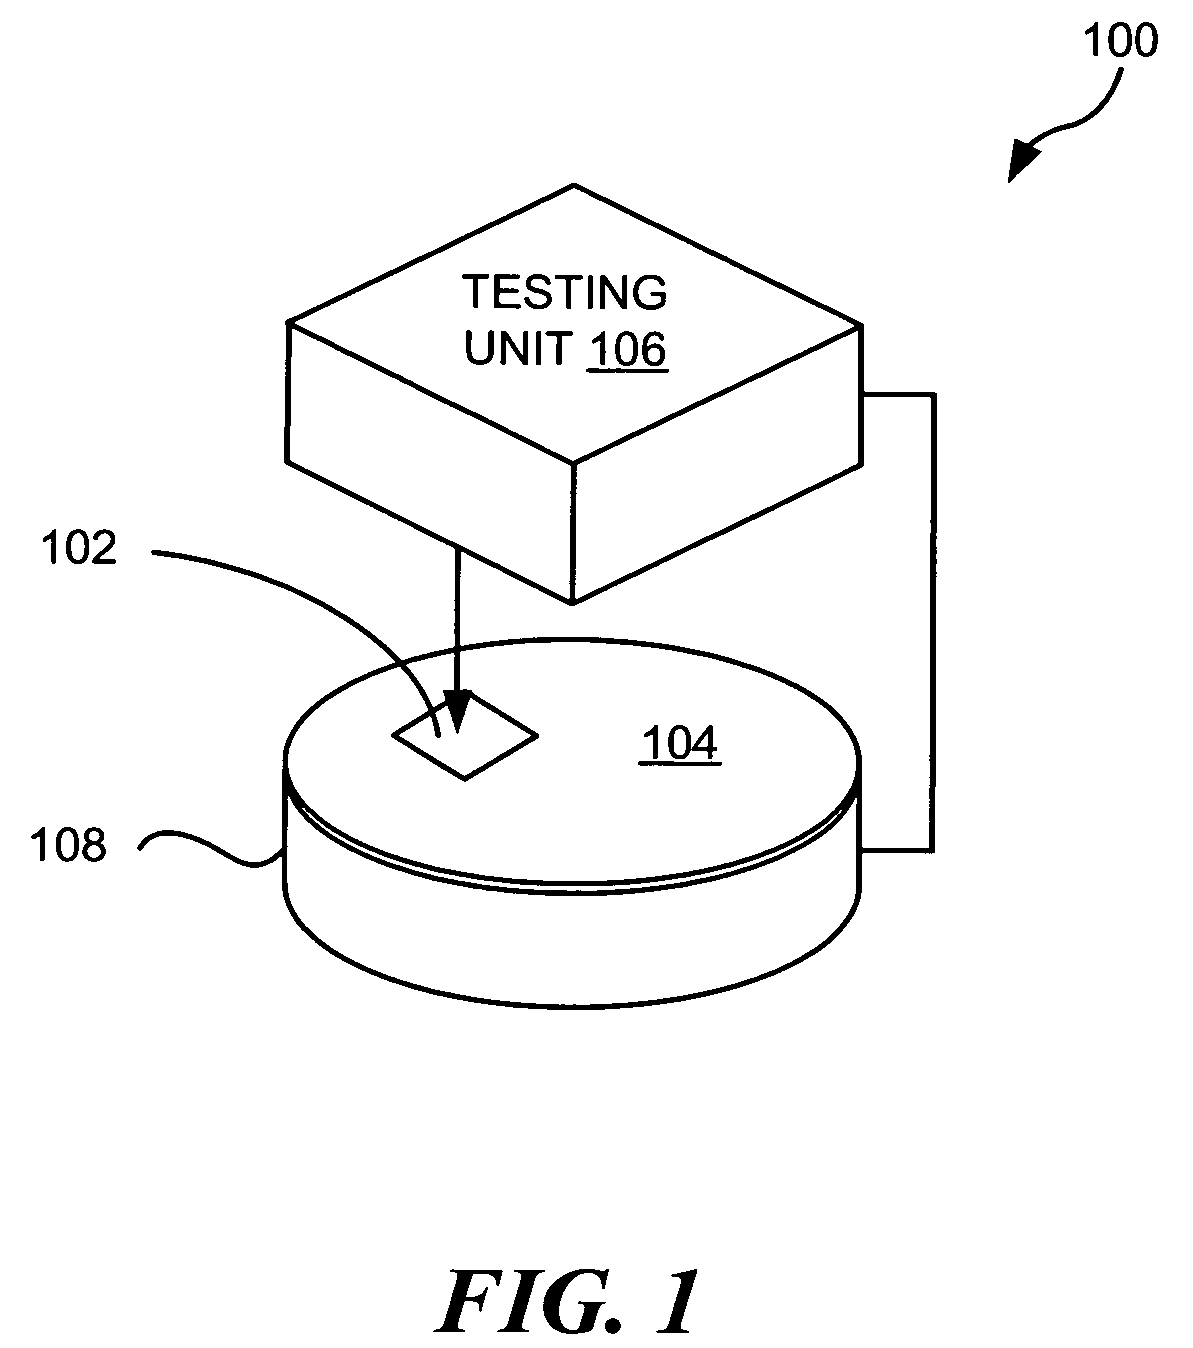 Integrated circuit die including a temperature detection circuit, and system and methods for calibrating the temperature detection circuit